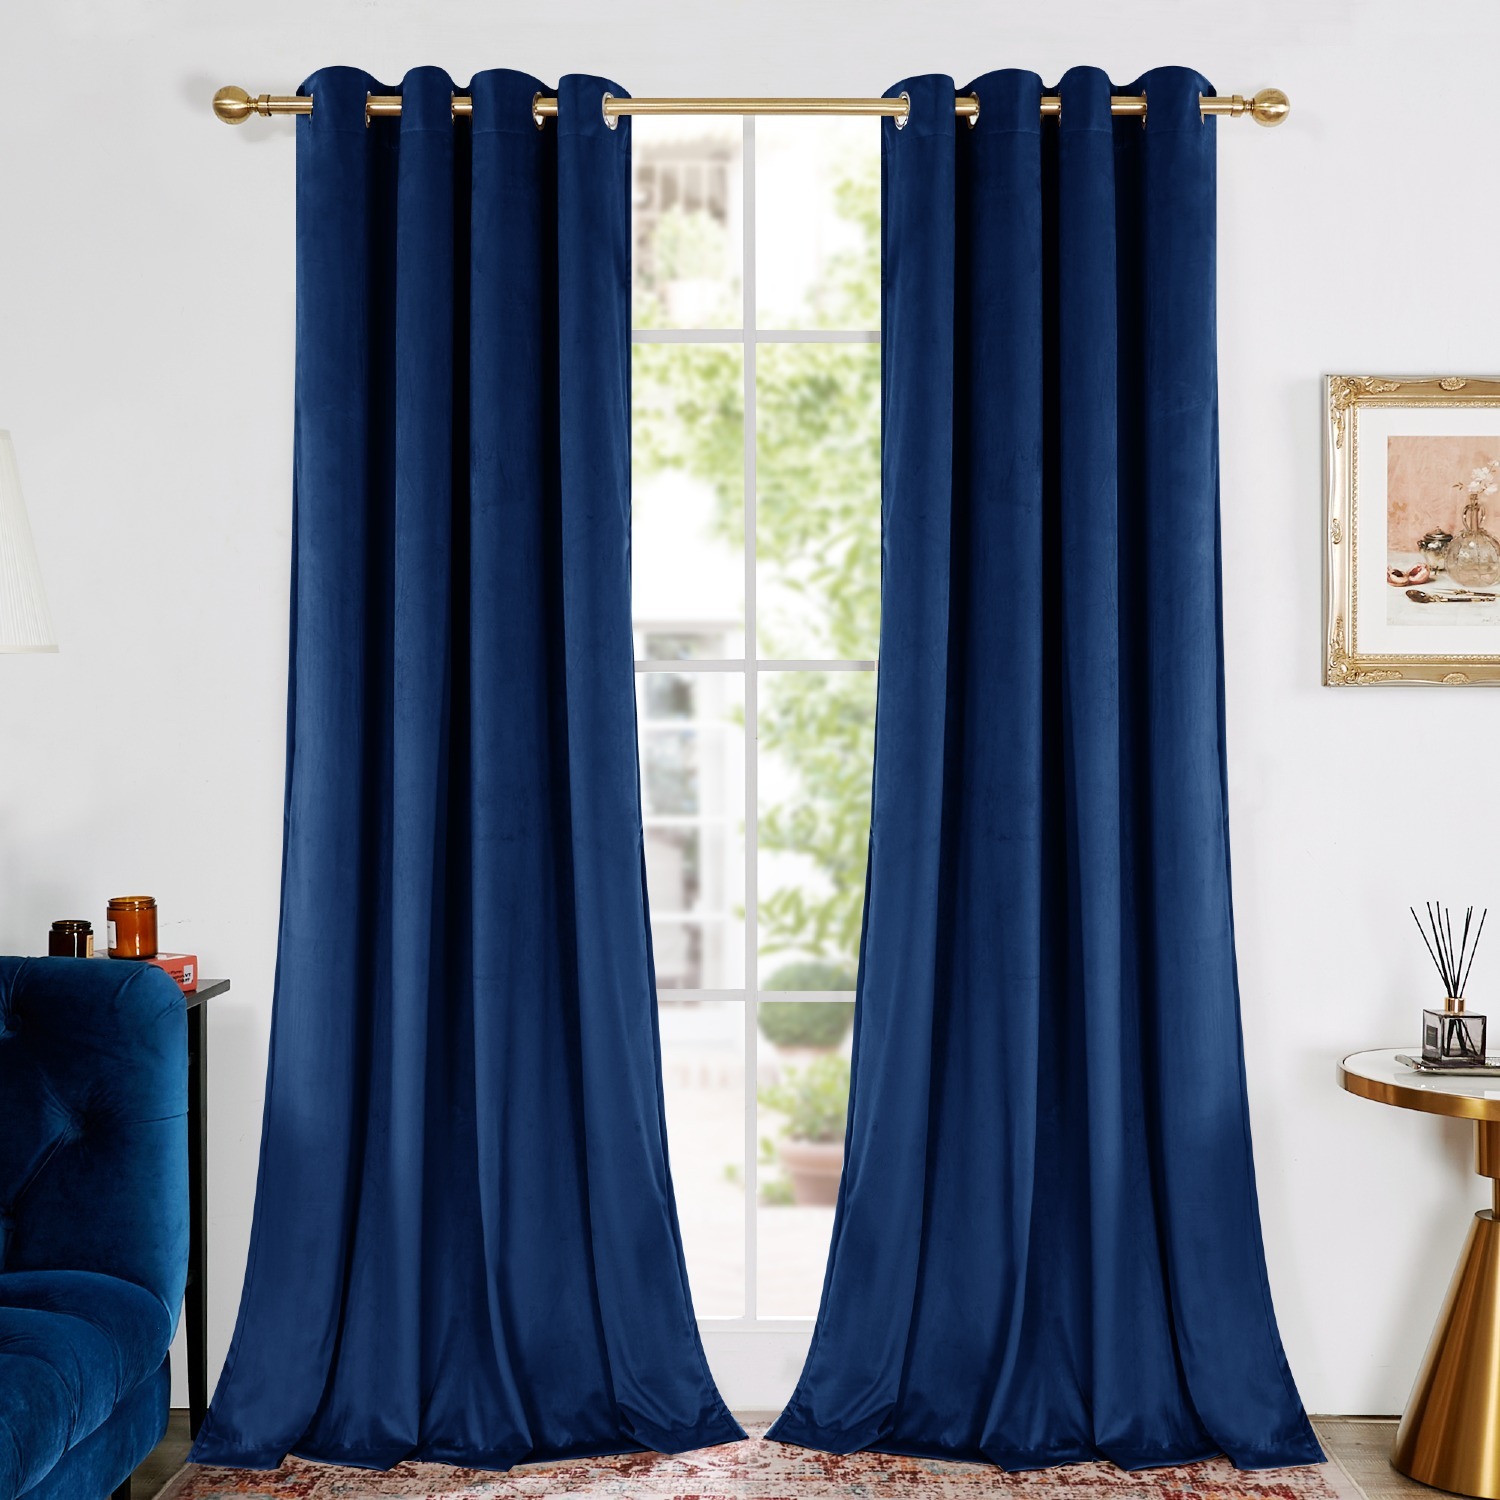 2-Pack Deconovo Velvet 100% Blackout Curtains (Various Colors & Sizes) from $11.50 + Free Shipping w/ Prime or $35+ orders